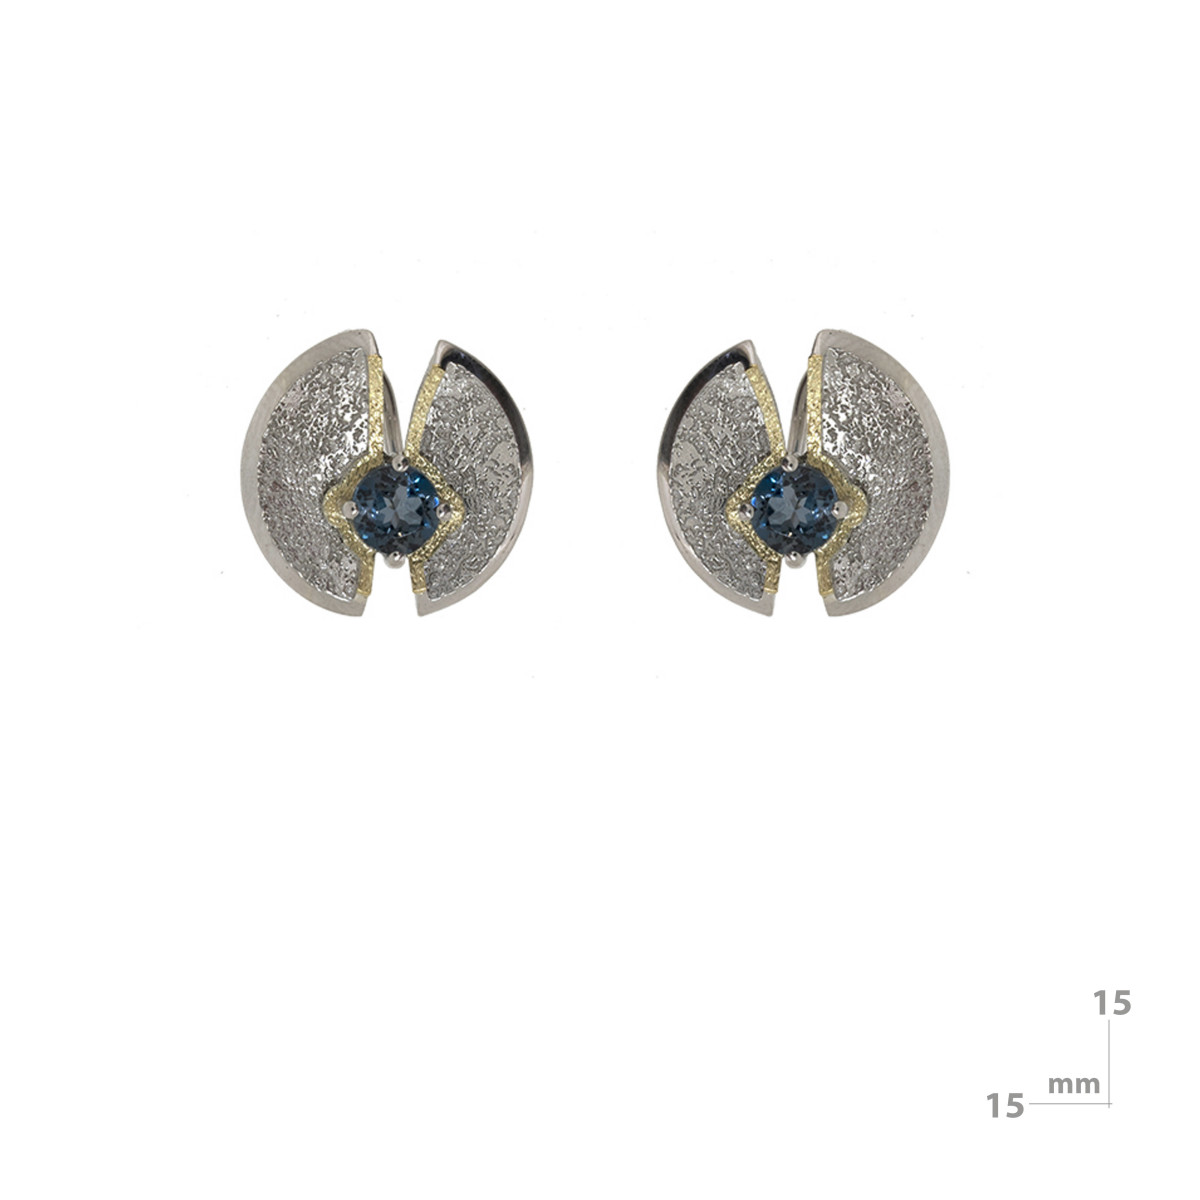 Earrings made of rhodium-plated silver, 18k gold and topaz